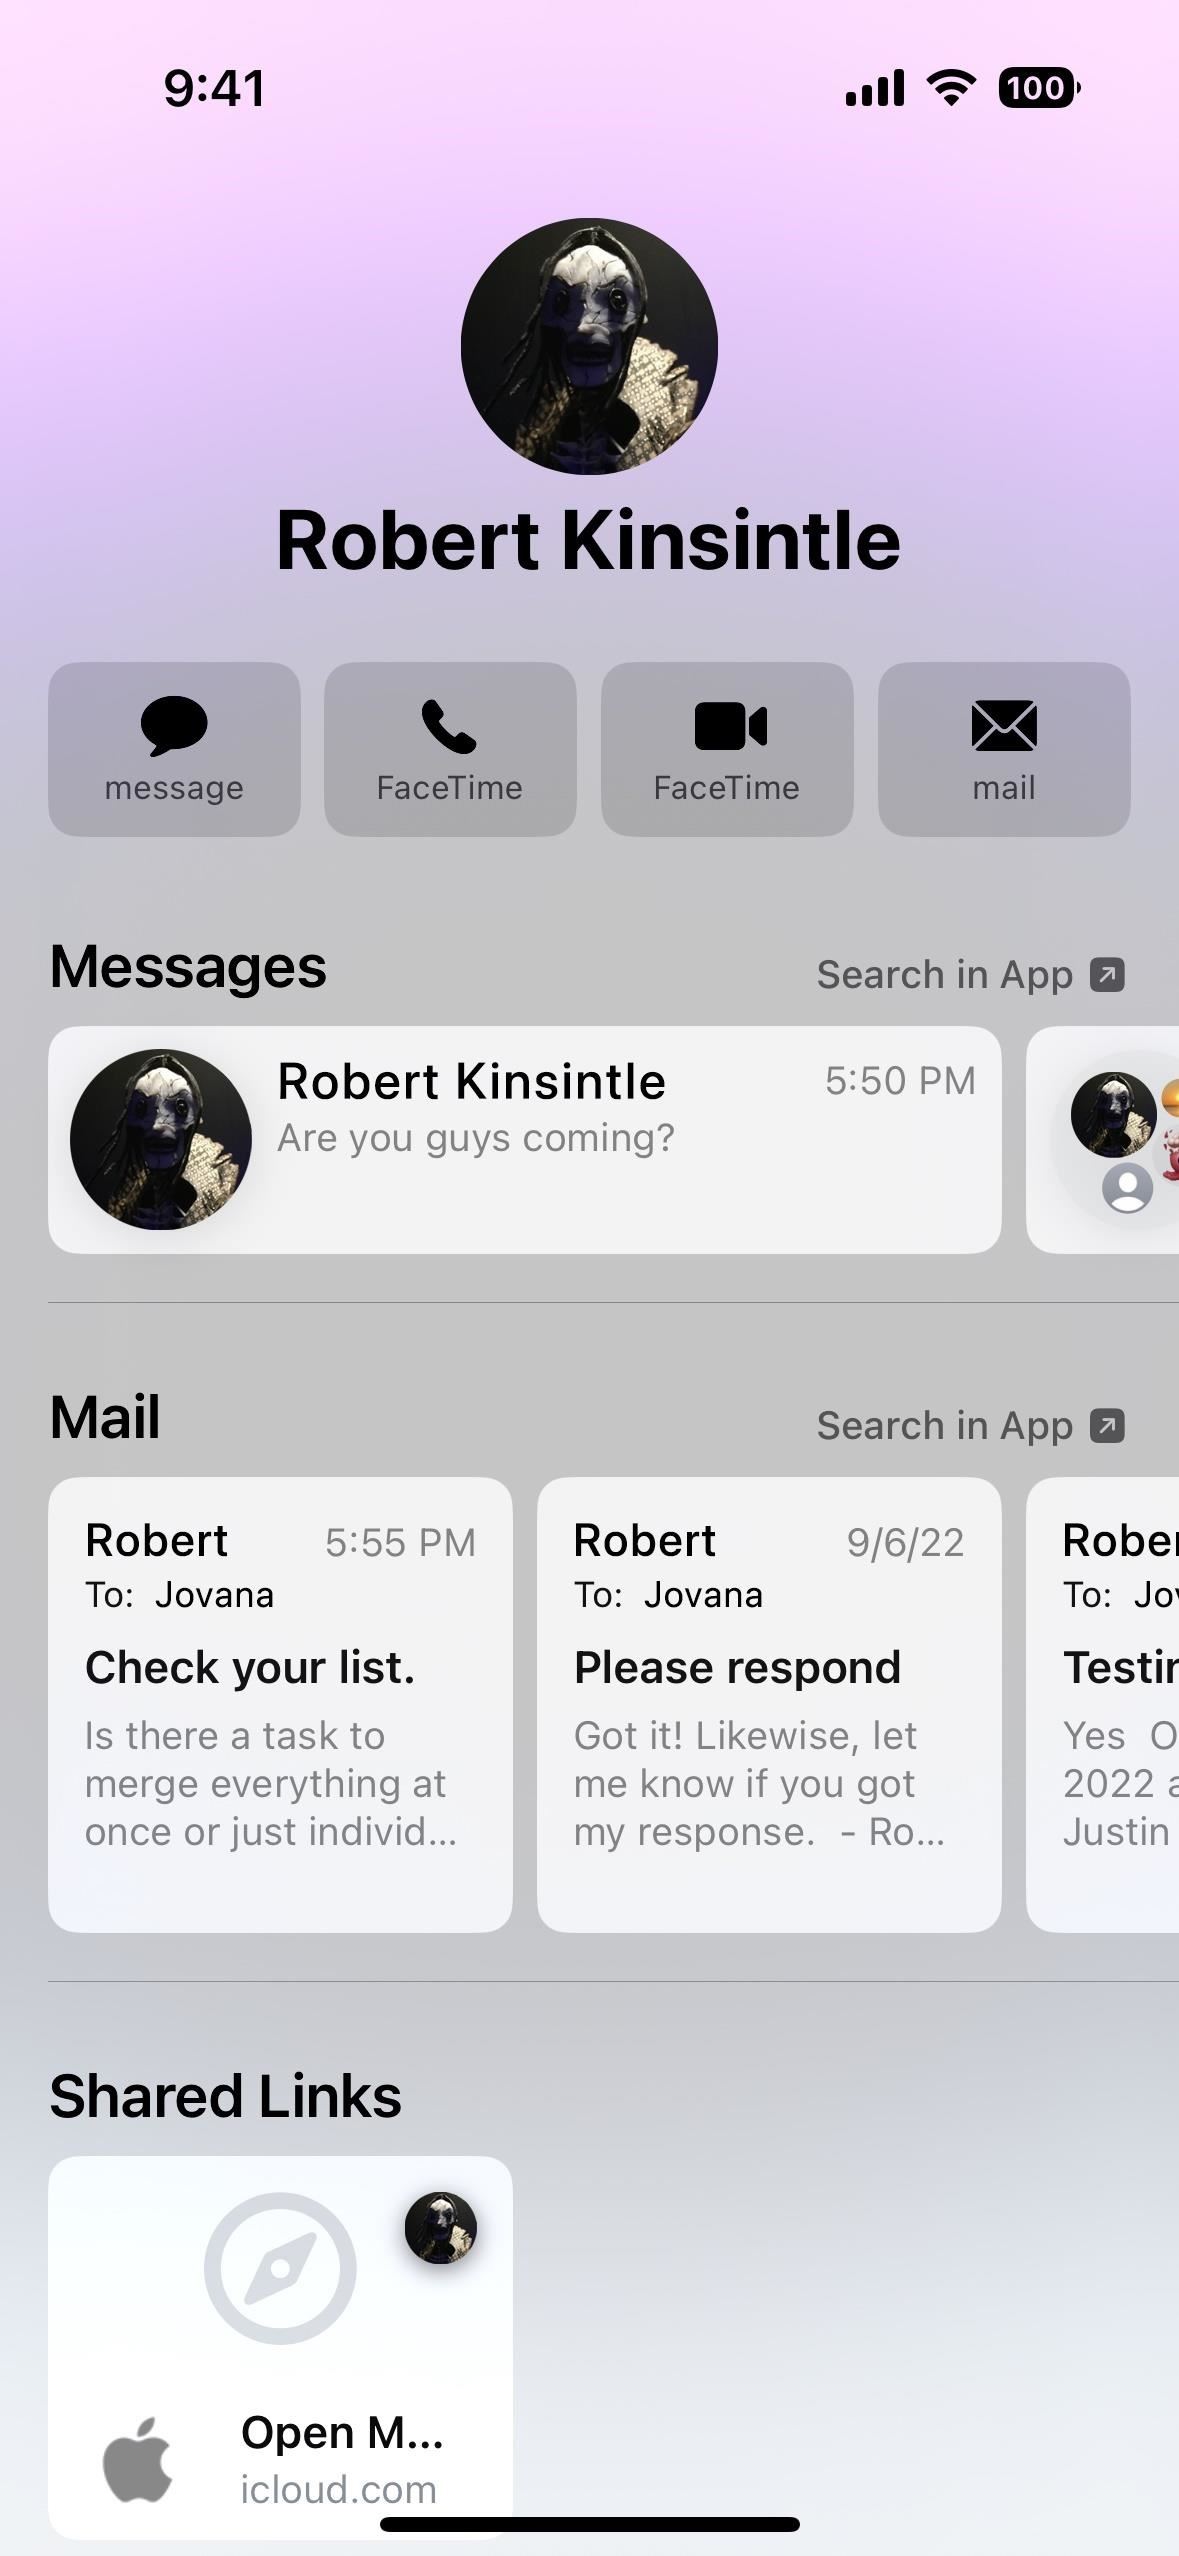 Your iPhone's Contacts app just got the biggest update yet